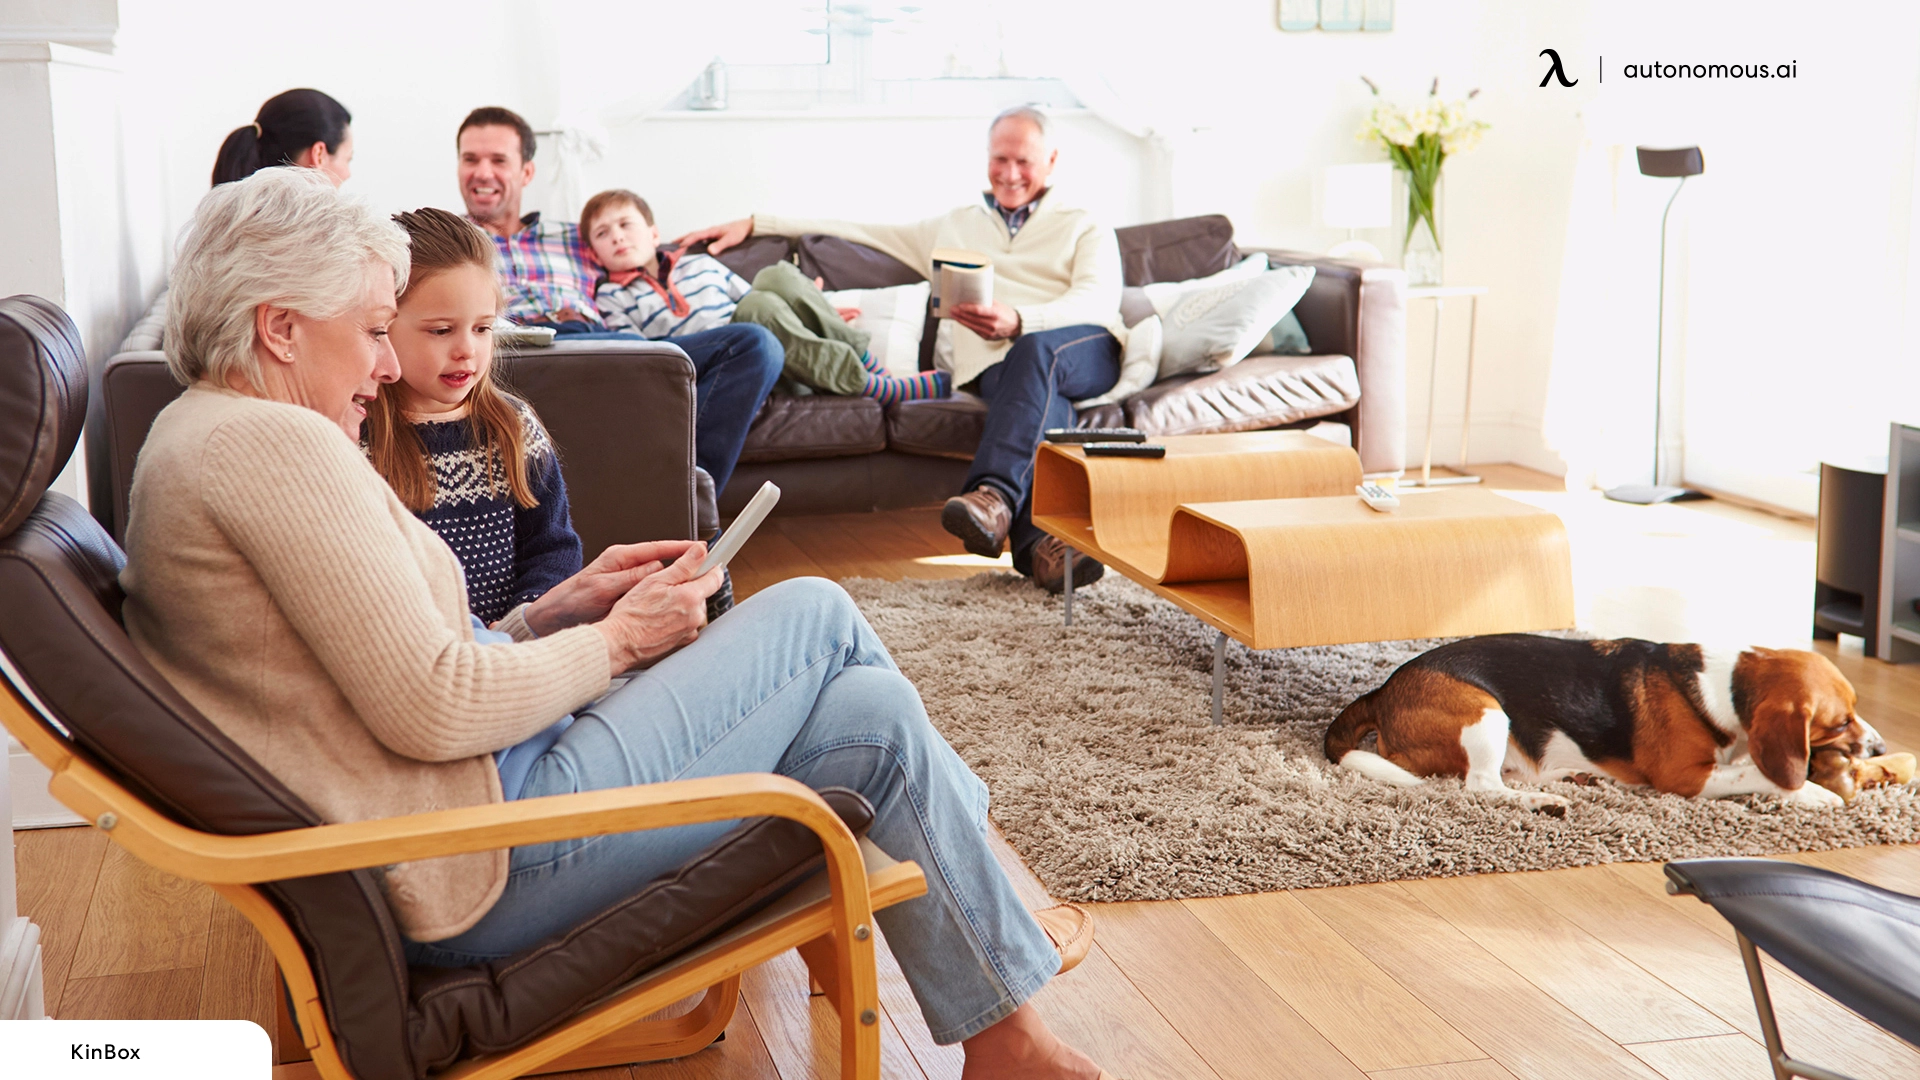 What Are the Benefits of Multigenerational Living?